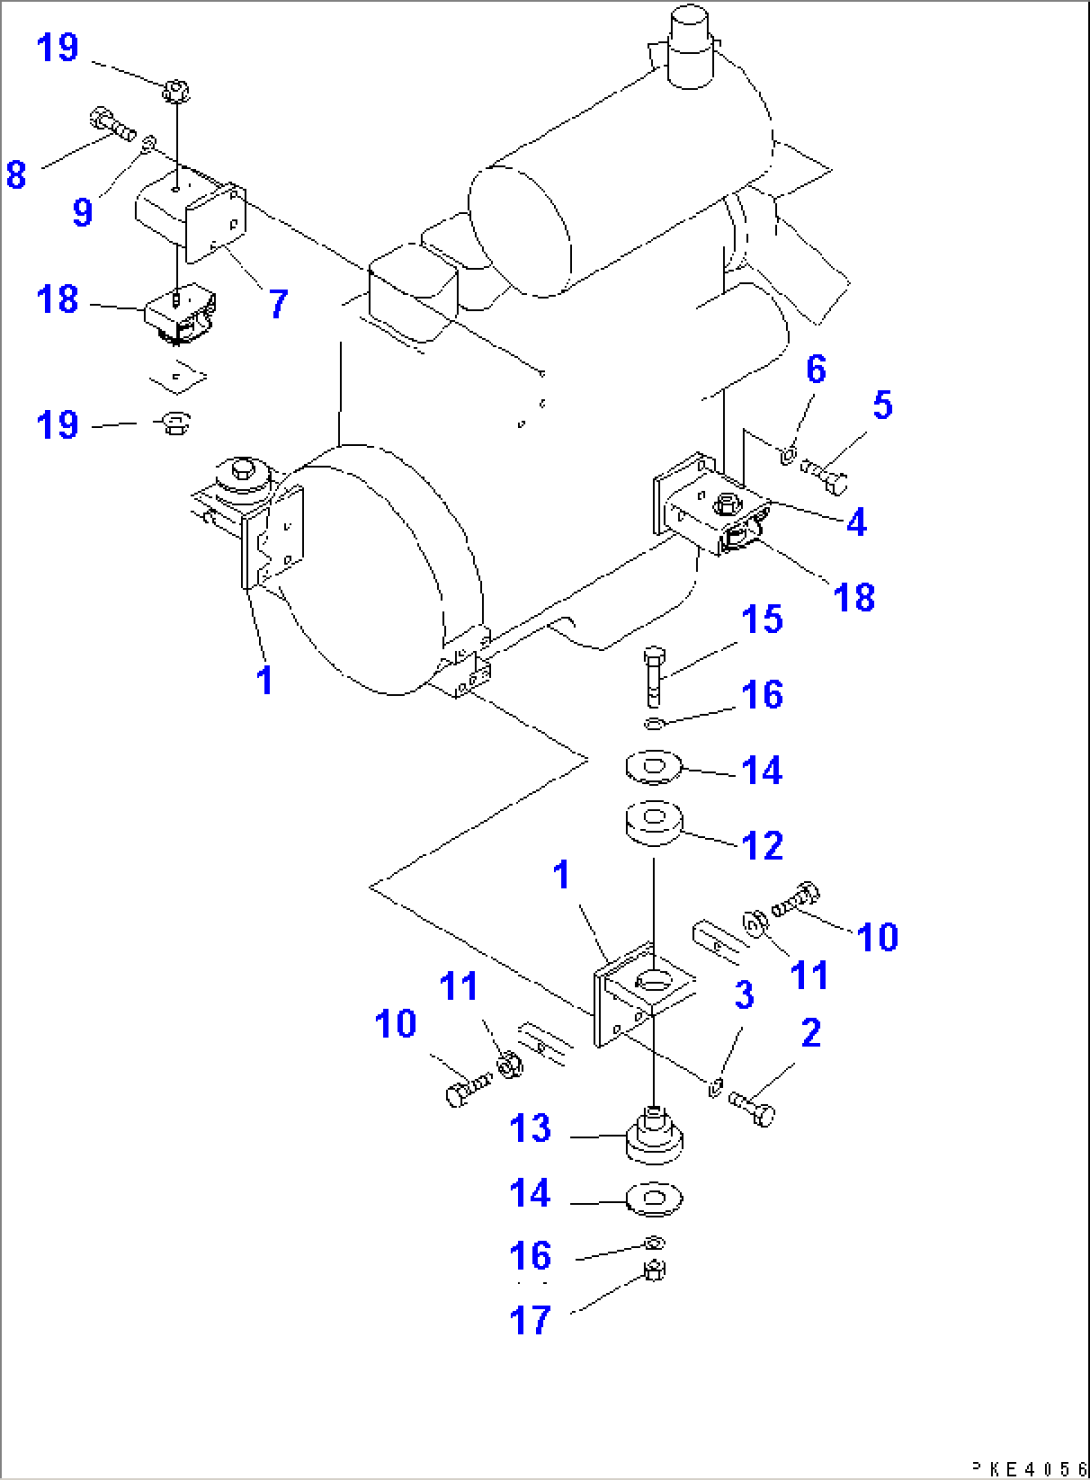 ENGINE MOUNTING PARTS(#10001-11500)